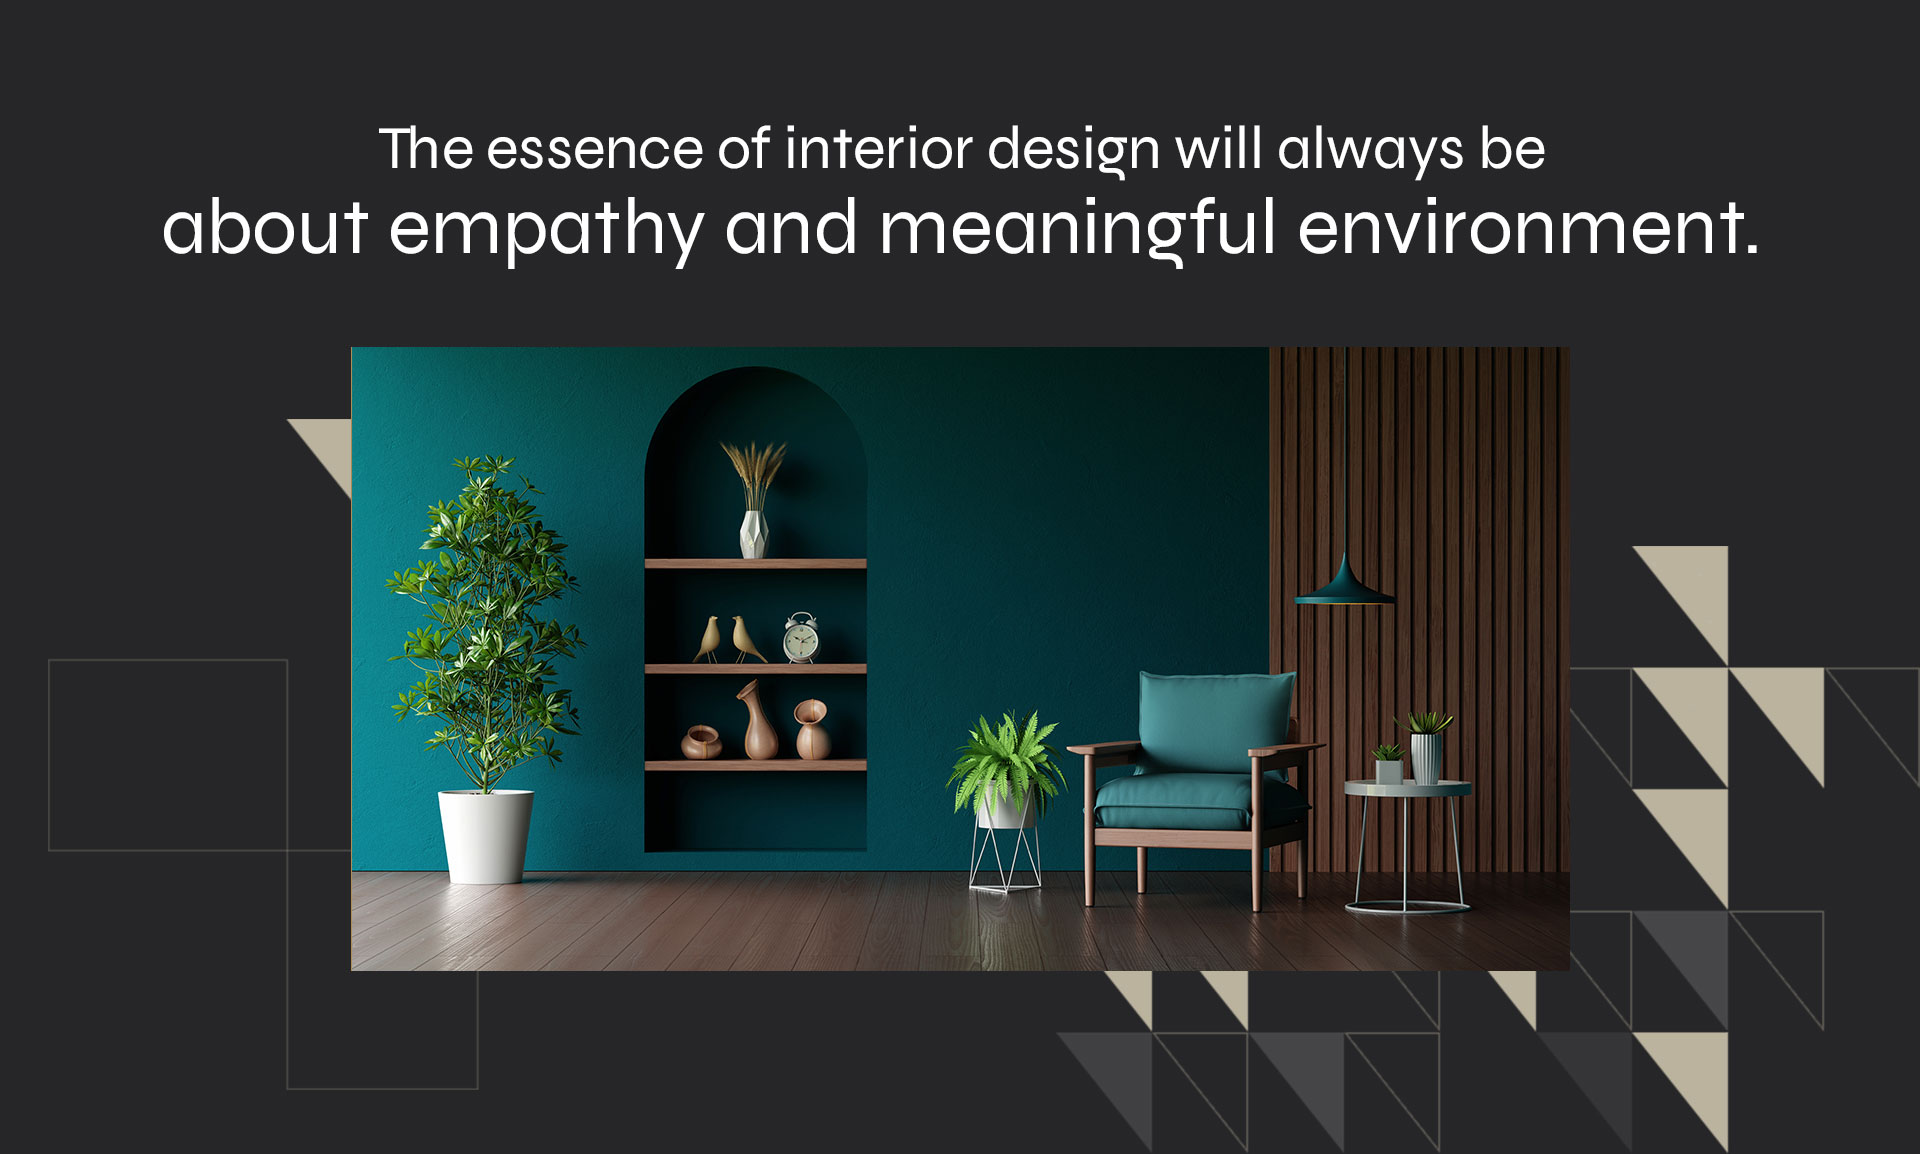 The essence of interior design will always be about empathy and meaningful environment.